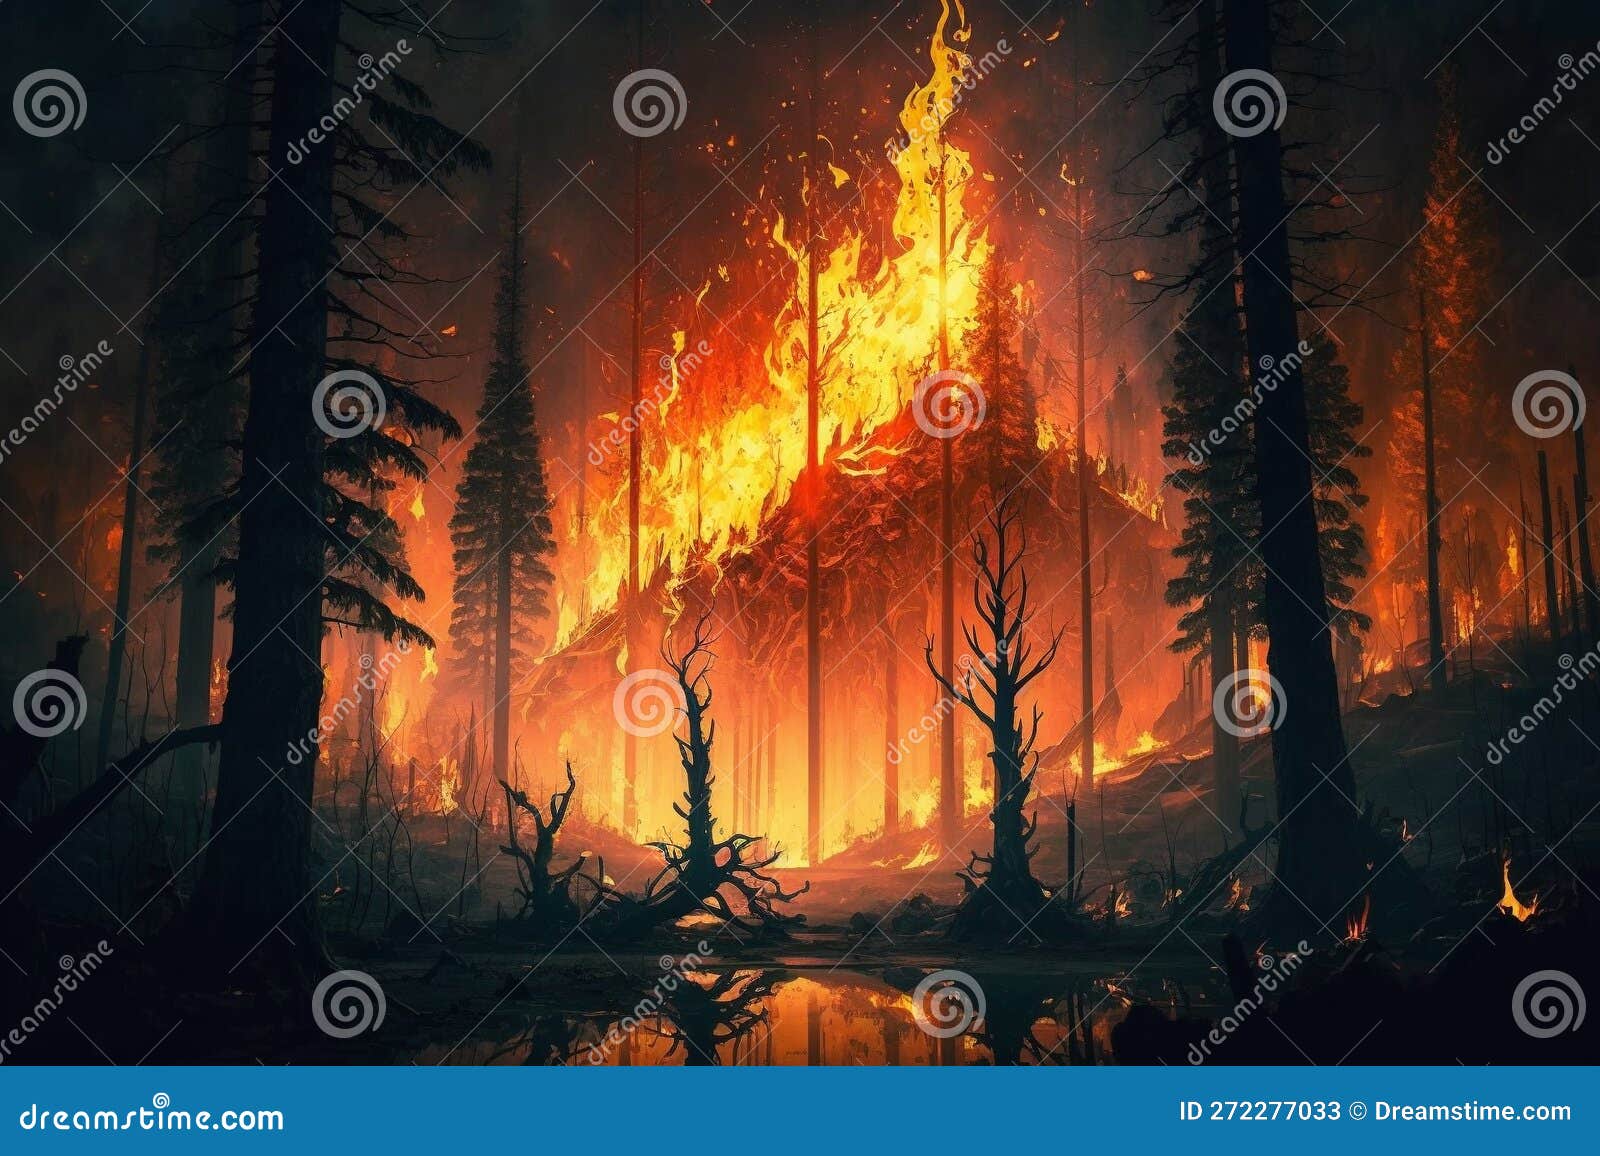 1,335 Forest Fire Animals Stock Photos - Free & Royalty-Free Stock Photos  from Dreamstime